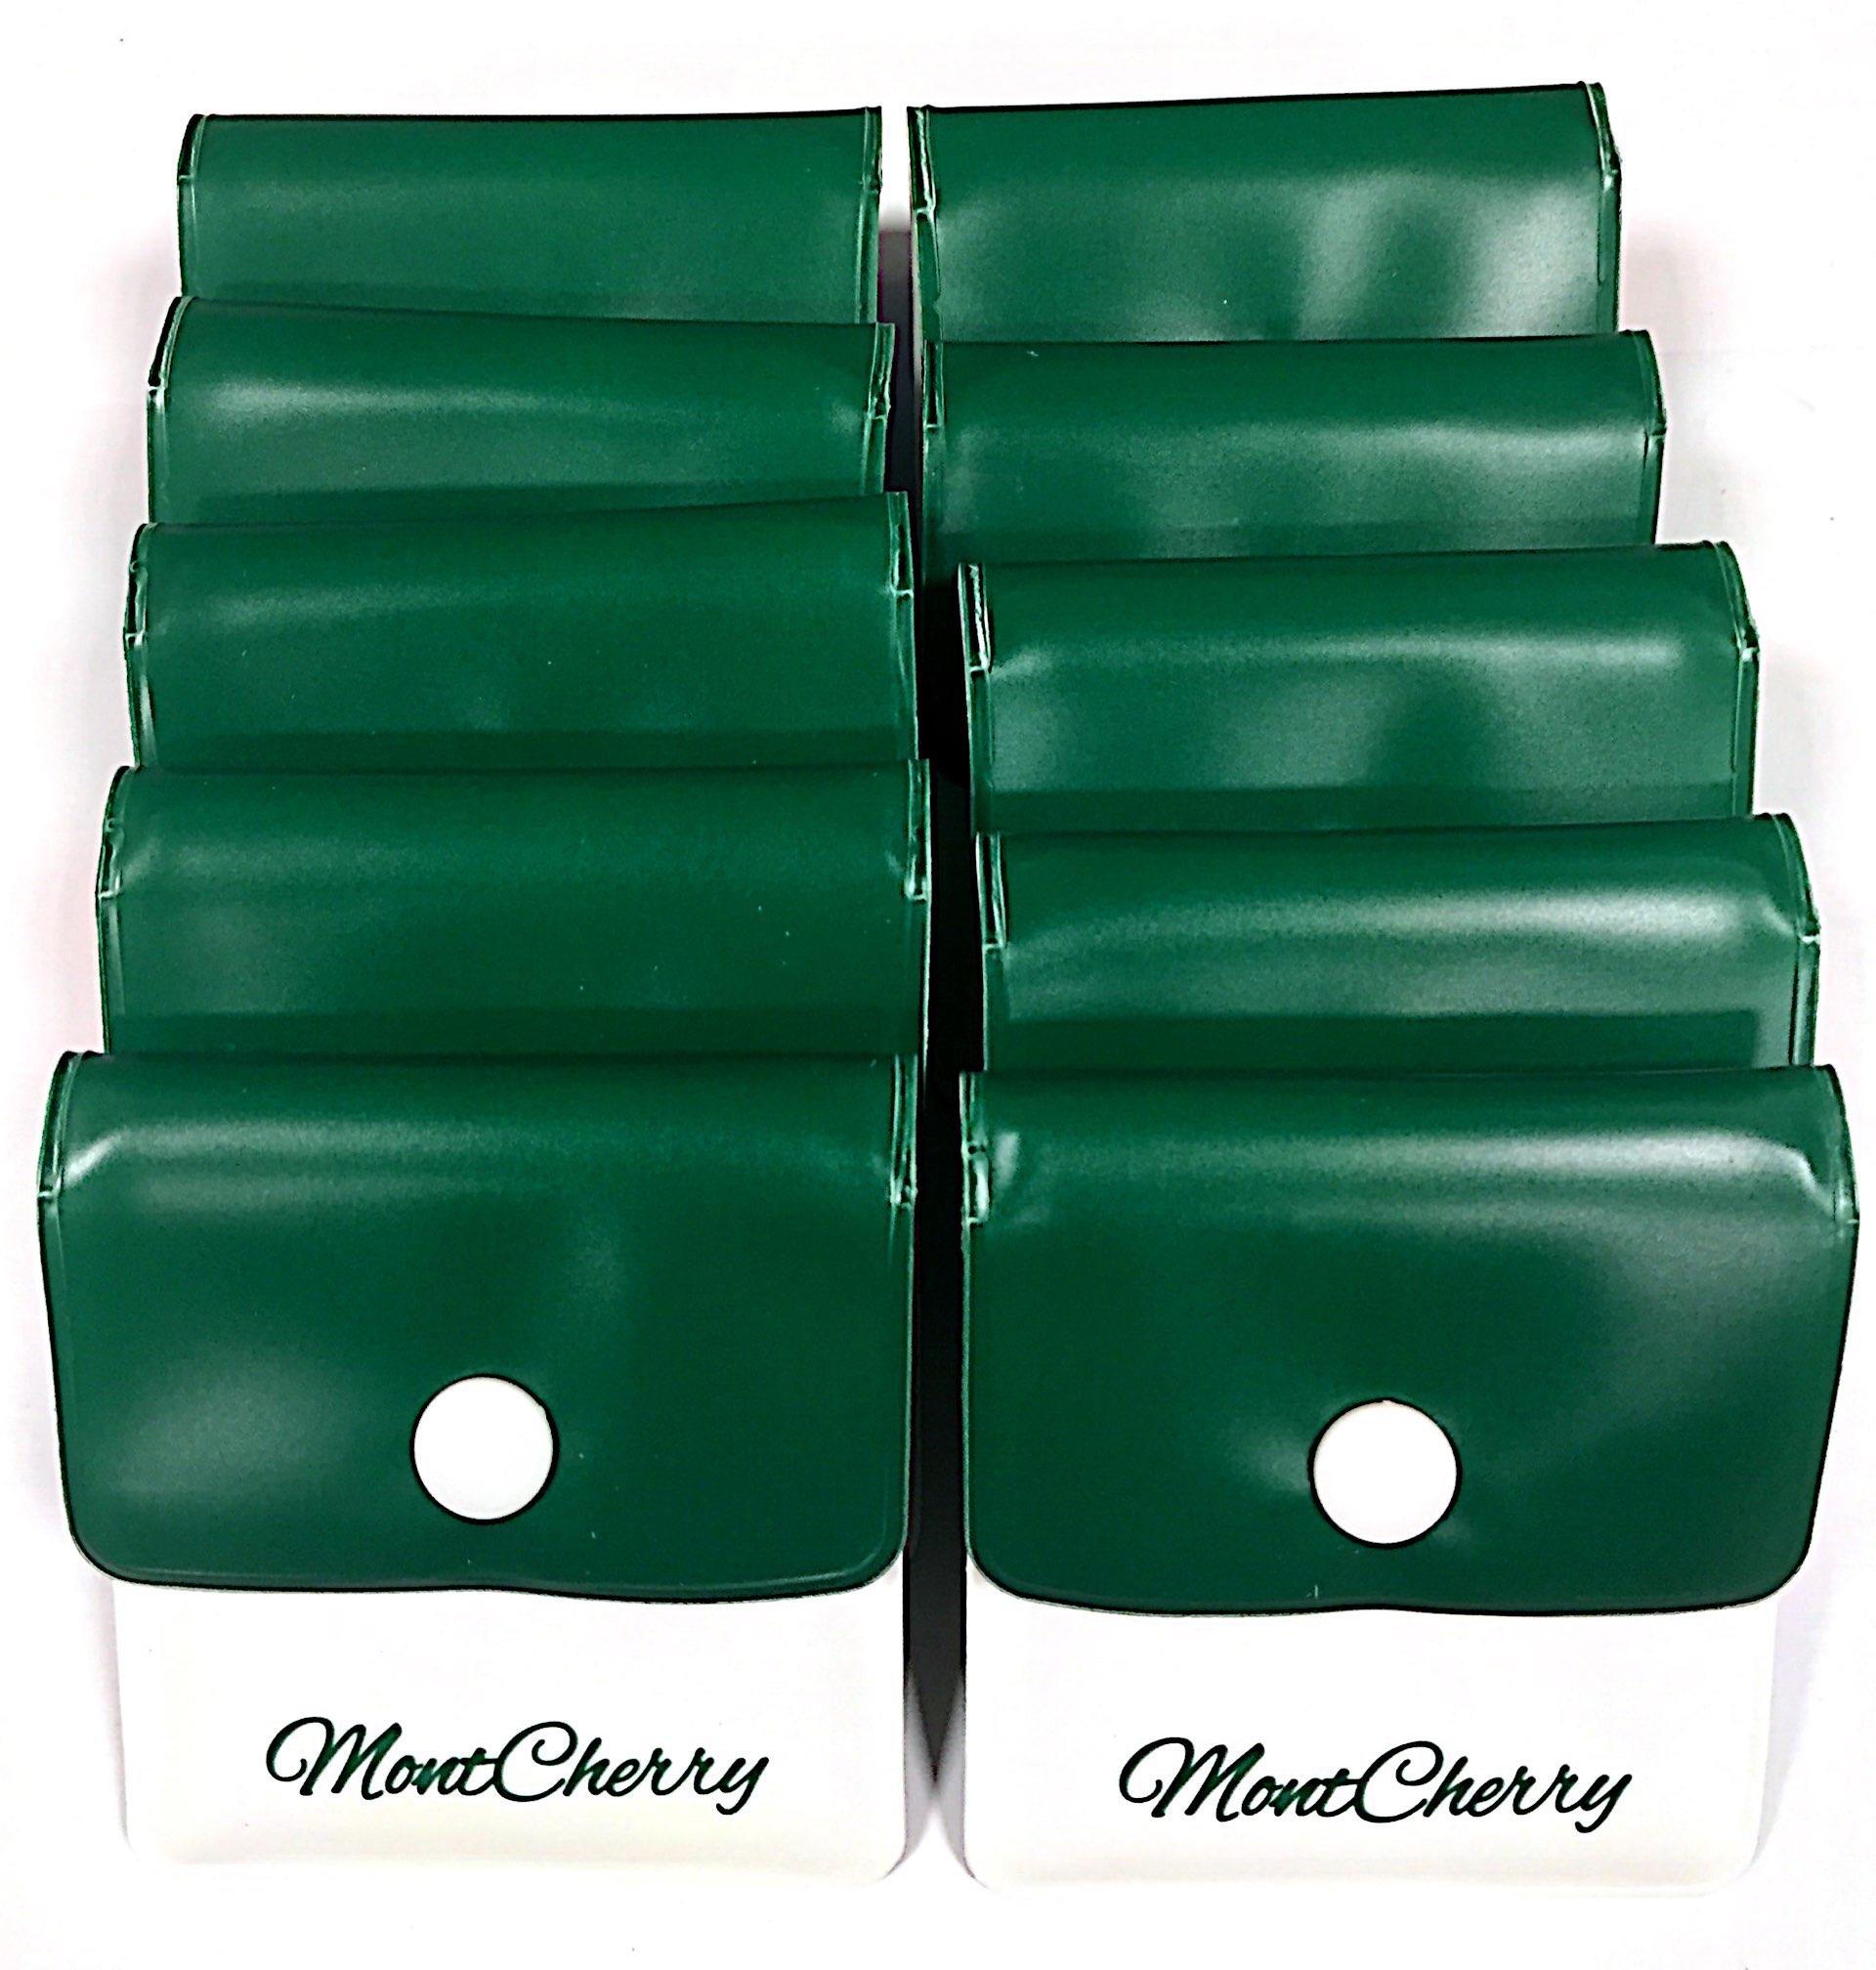 MontCherry Brand Pocket/Purse Ashtray in Various Colours by eTrendz 